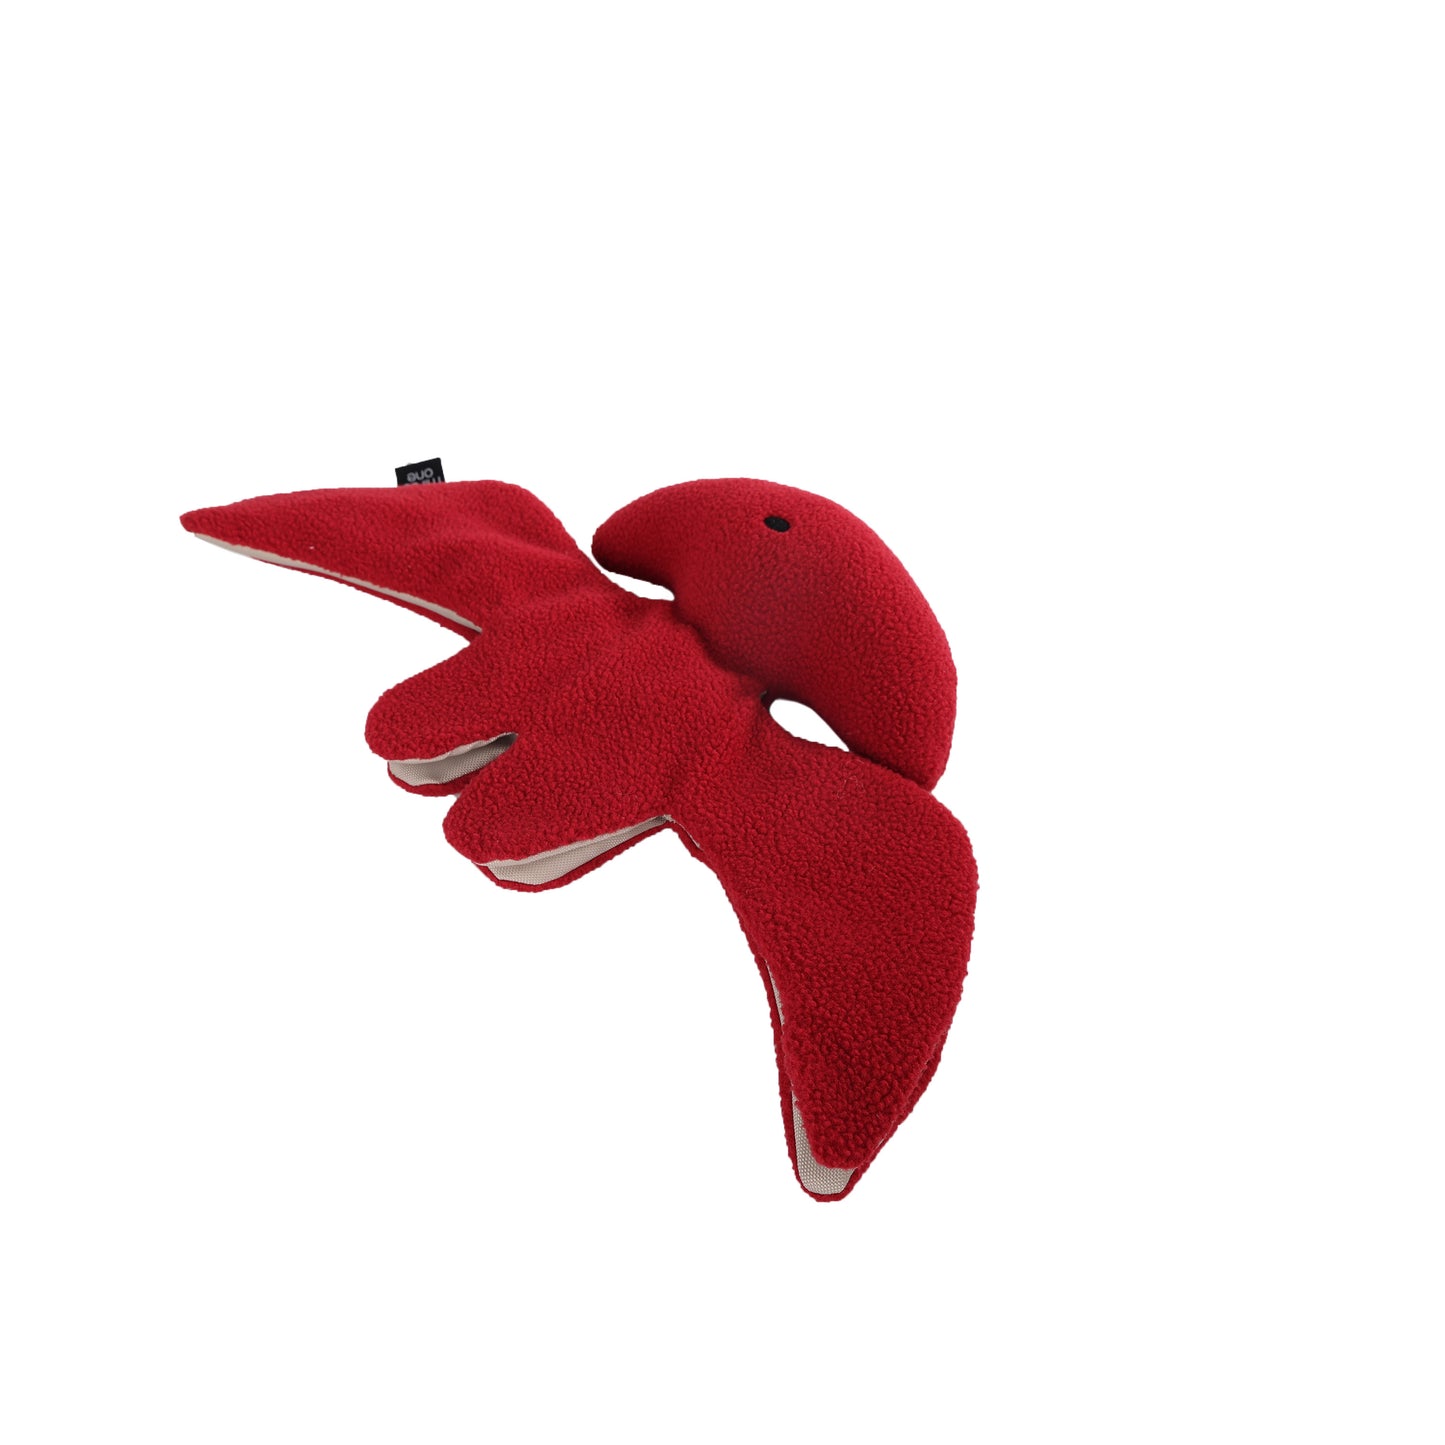 Folding Dog Toy - pterodactyl Red